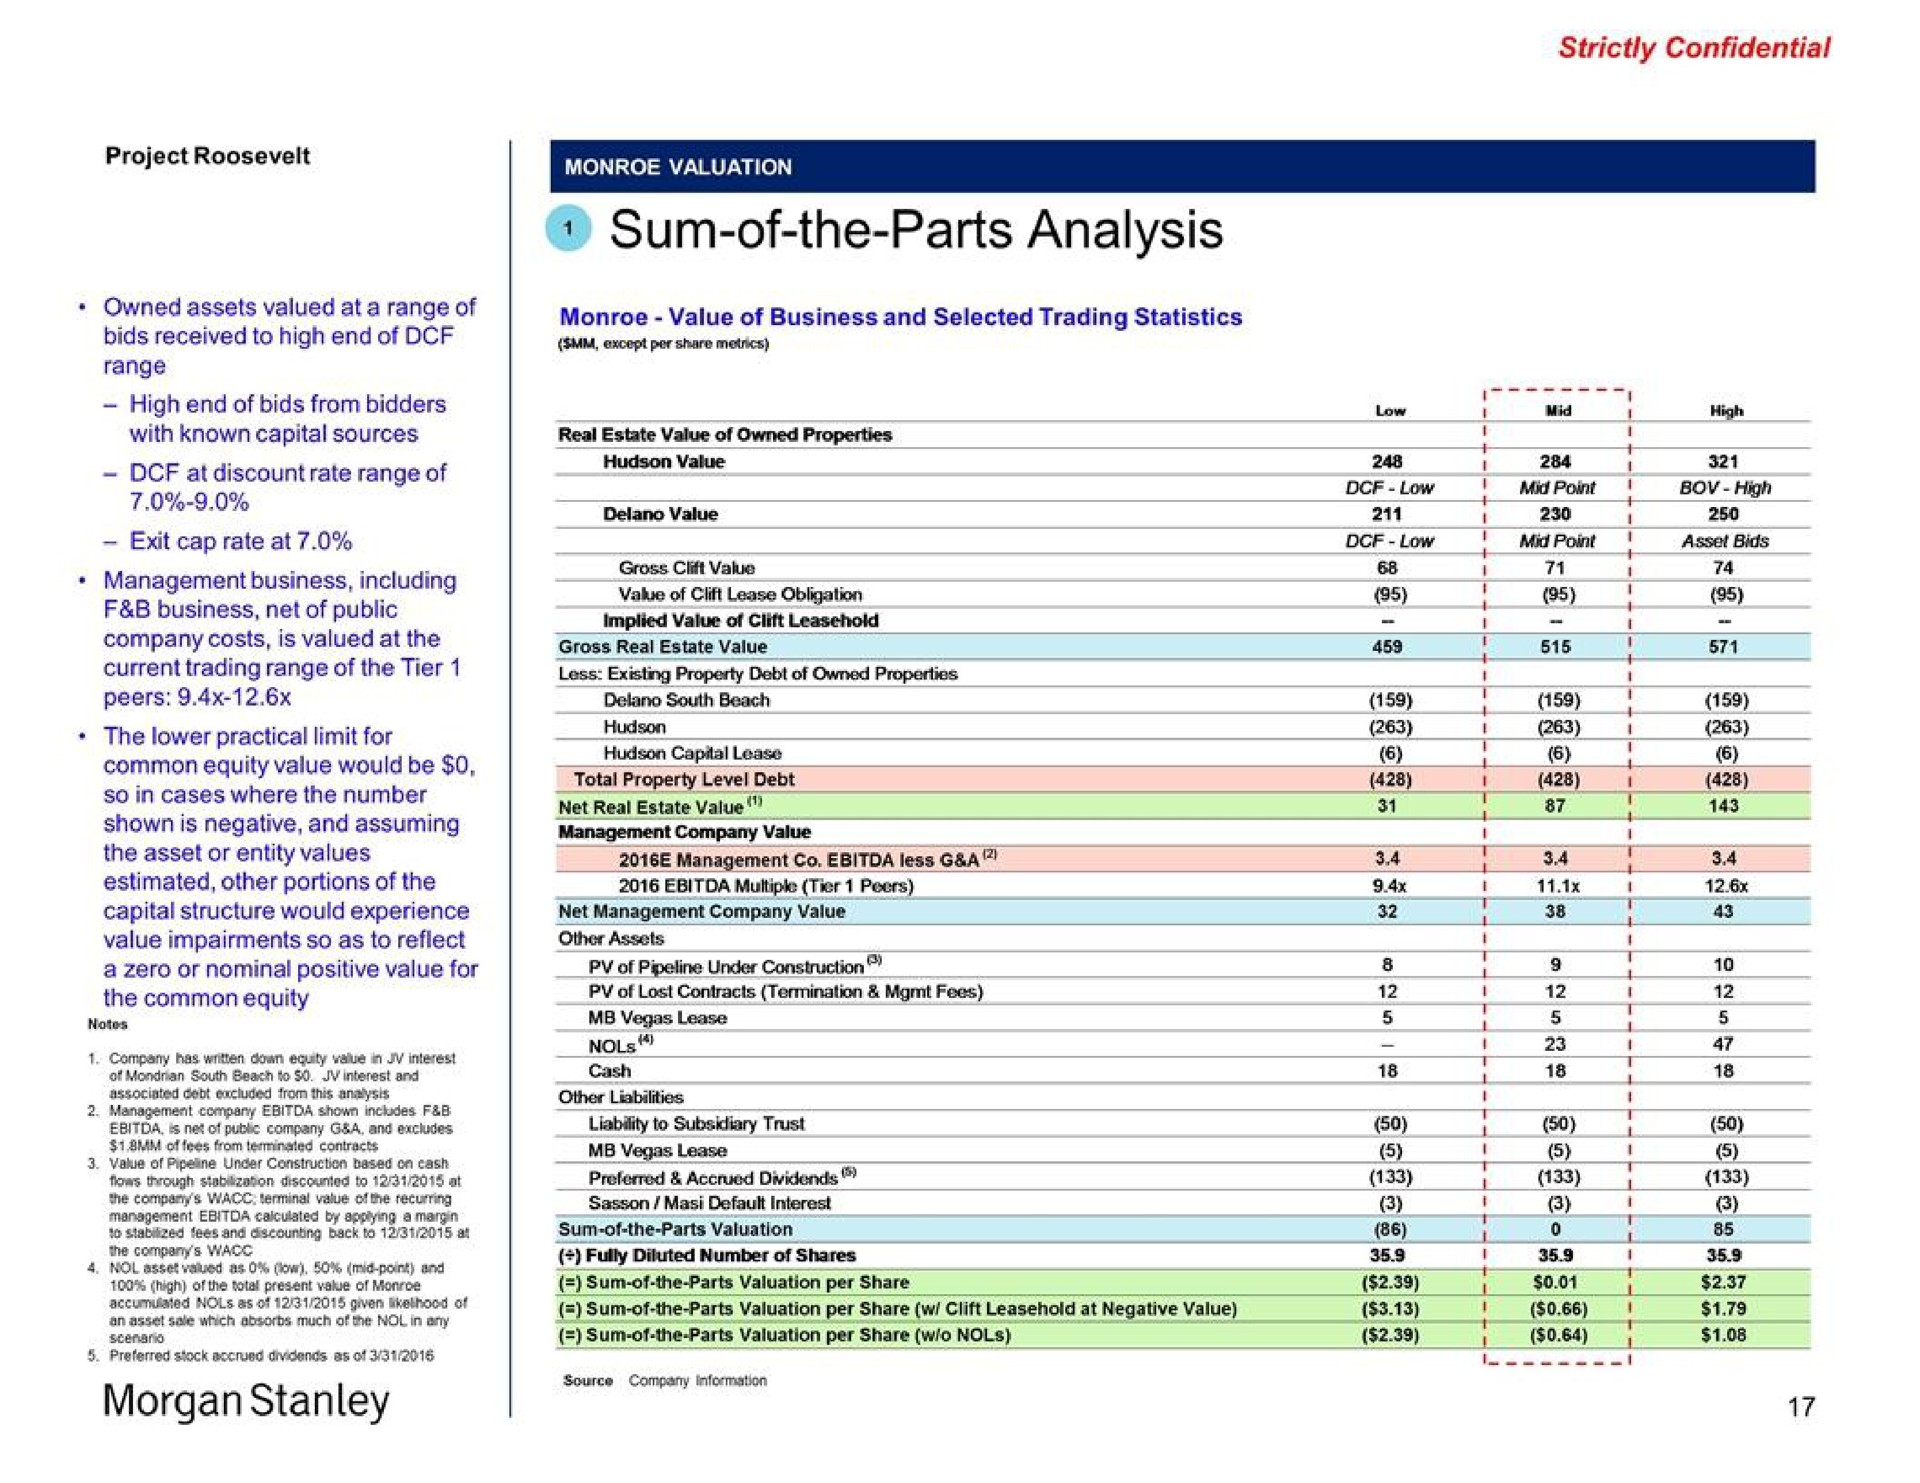 morgan sum of the parts analysis capital lease net management company value valuation per share sum of the parts sum of the parts valuation per share a | Morgan Stanley